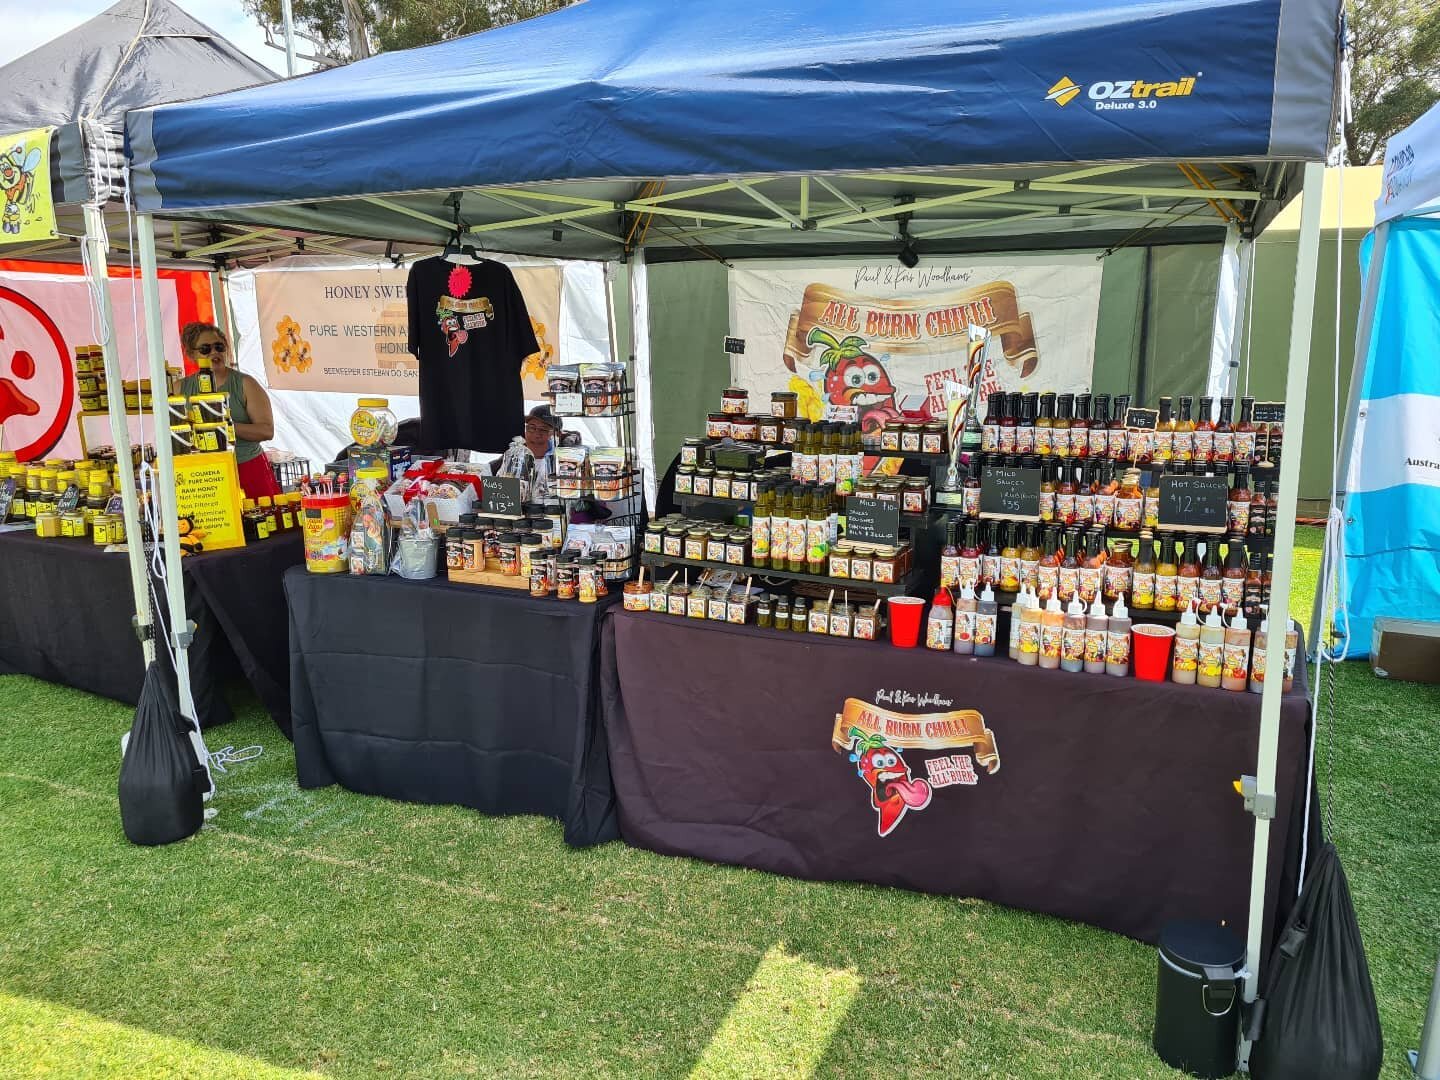 Join us at Rushton Park for the Kelmscott Show. It's absolutely PUMPING with food trucks, rides, showbags, market stalls and heaps more!!
We're here until 6pm tonight. Come on down and tantalise your tastebuds. Don't forget to ask us about our Show s